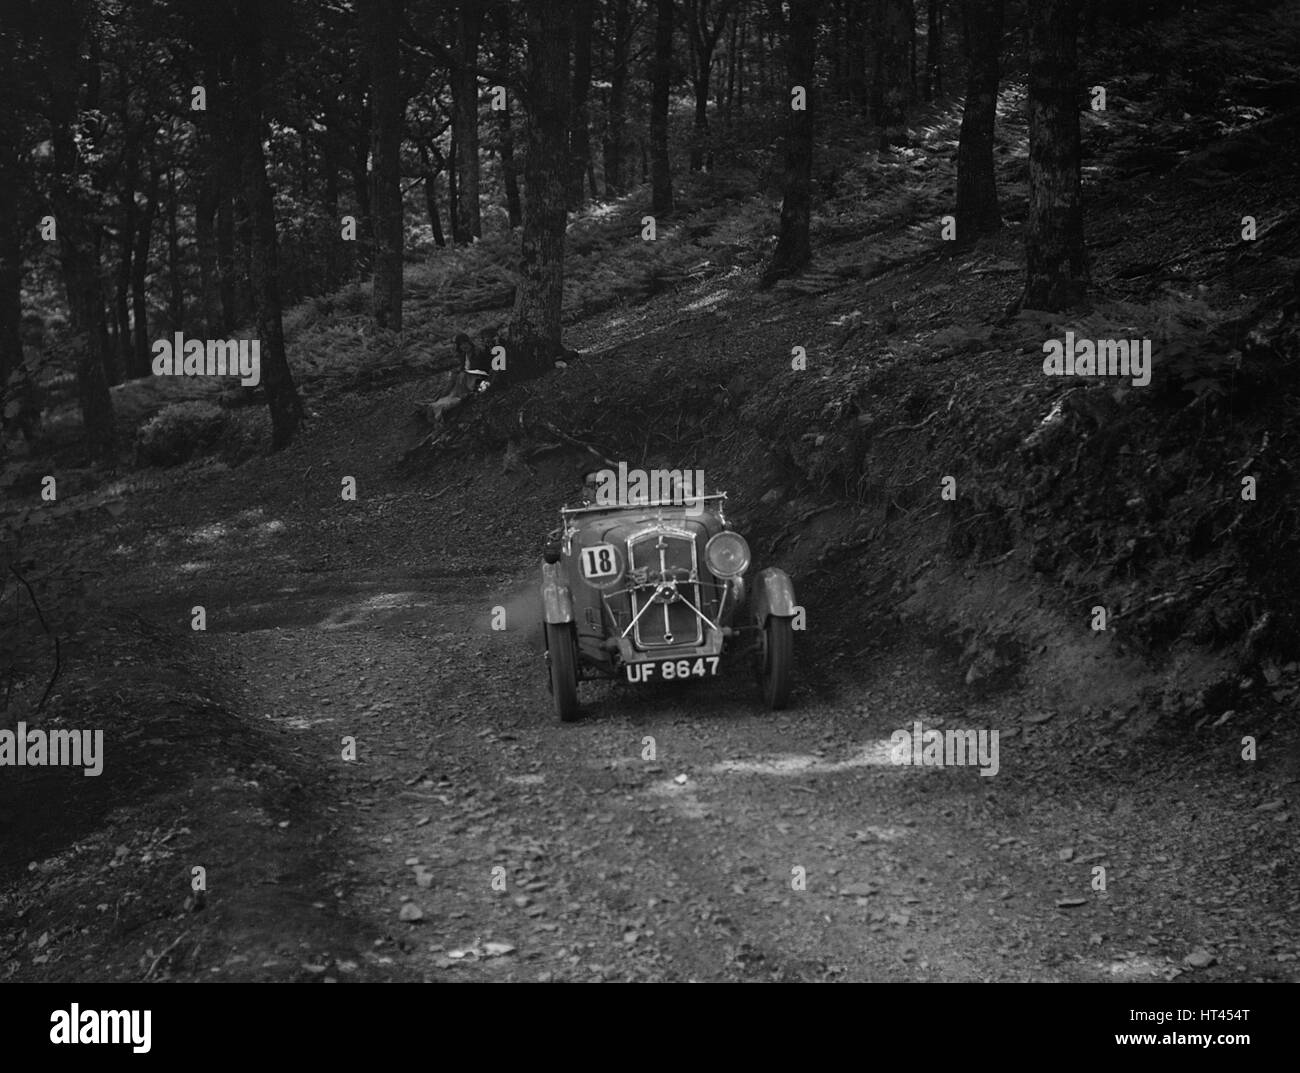 Wolseley Hornet of ARC Rigby taking part in a motoring trial, c1930s. Artist: Bill Brunell. Stock Photo